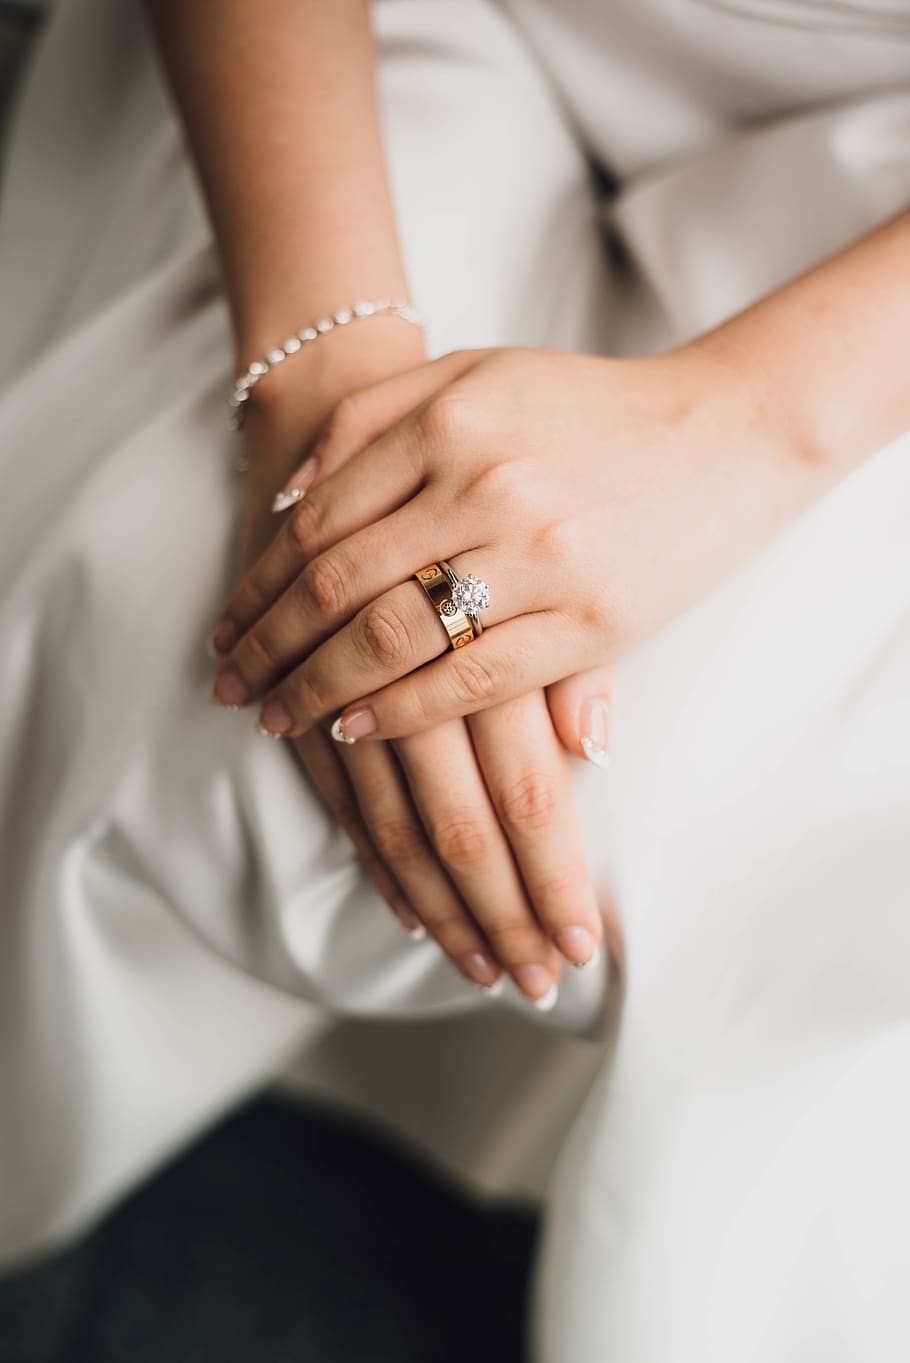 wedding, ring, proposal, marriage, couple, dress, bride, white, hand, human hand